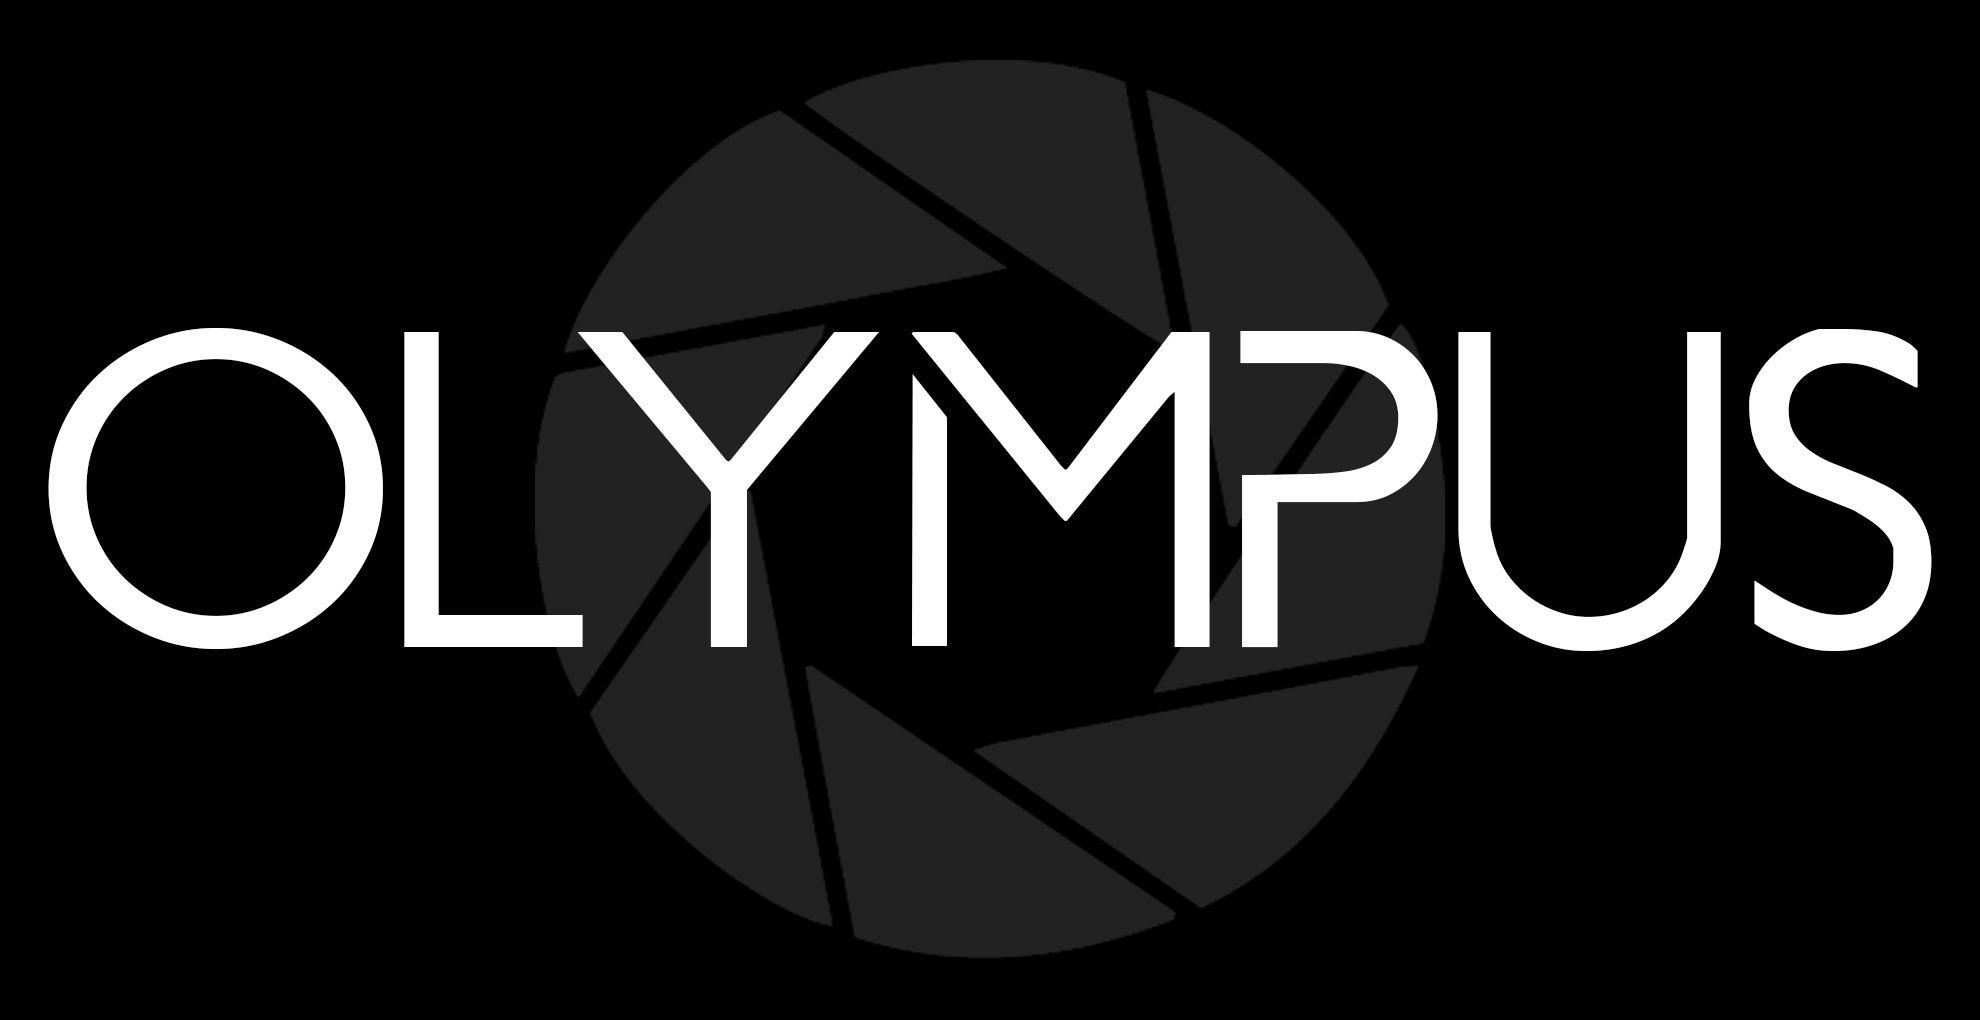 Olympis Logo - Olympus Rebrand - The Creative Works of Eric Jussaume